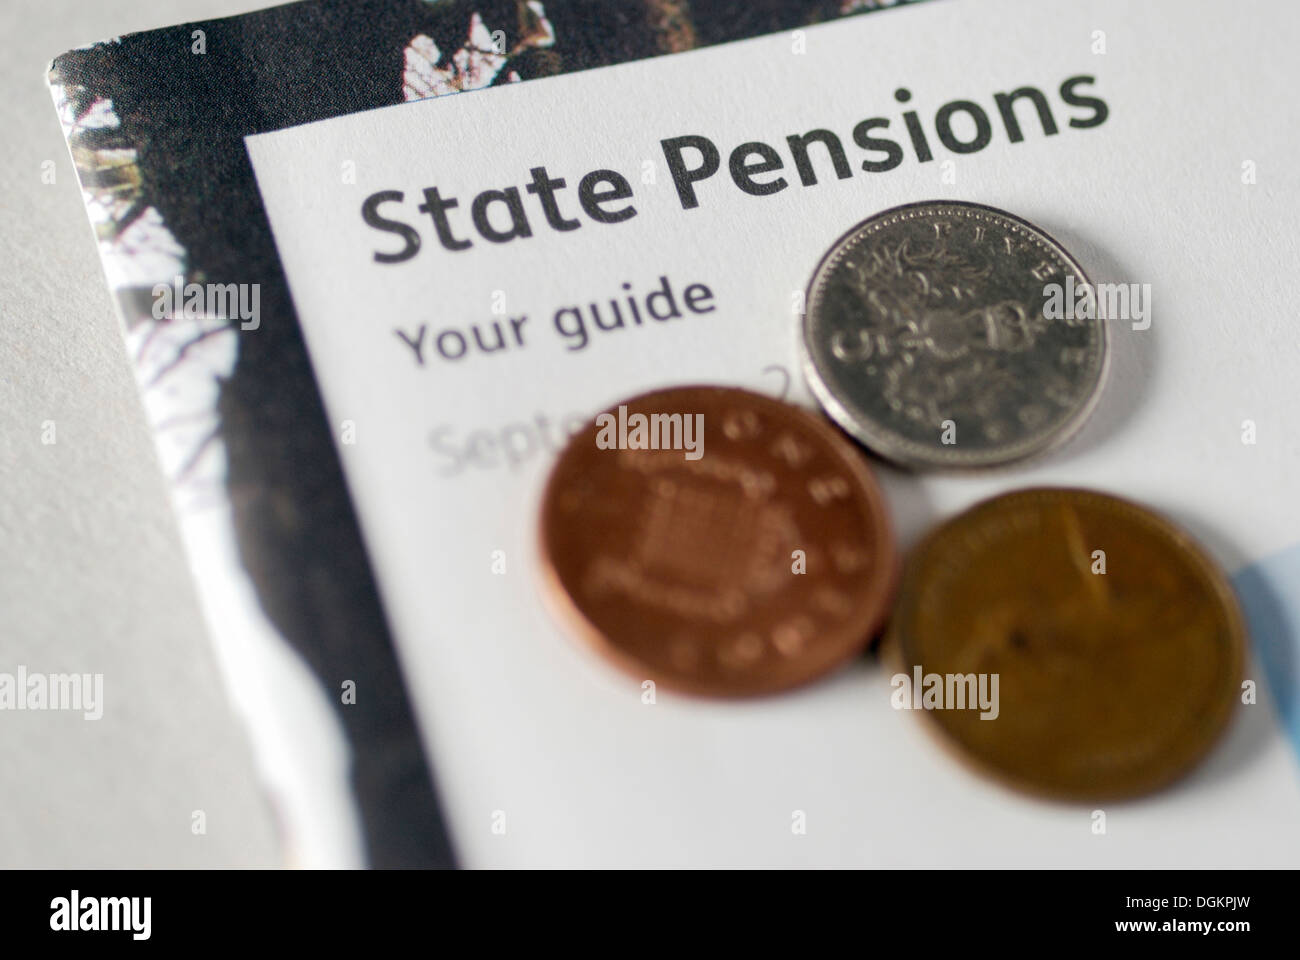 Government Pensions Service leaflet on State Pensions. Stock Photo